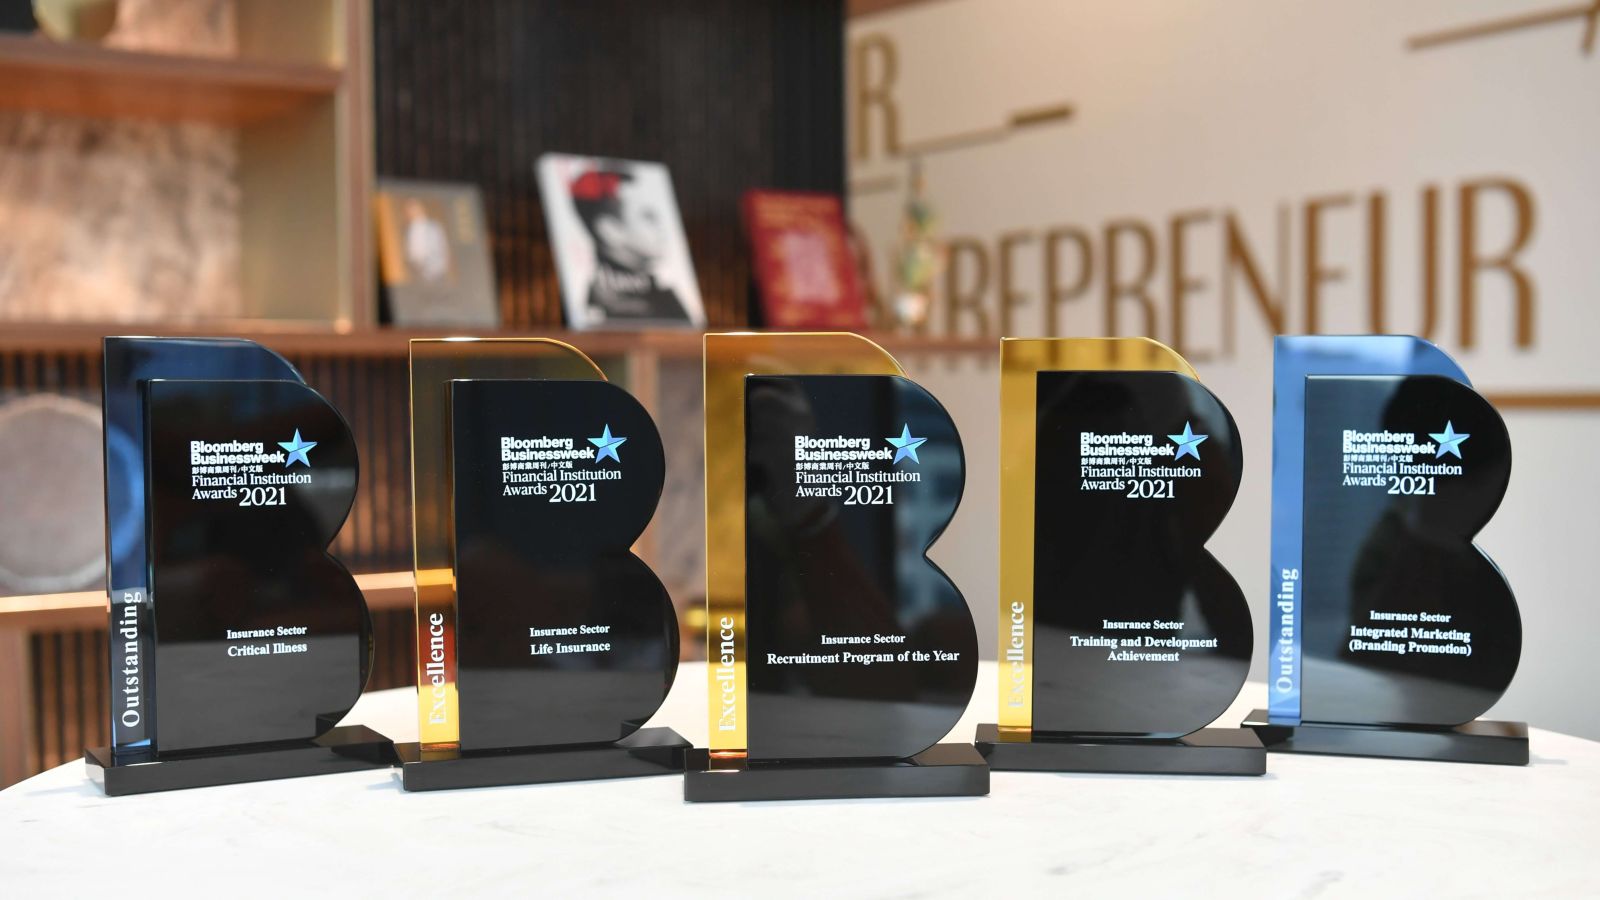 FTLife won 5 Awards in Bloomberg Businessweek/Chinese Edition Financial Institution Awards 2021